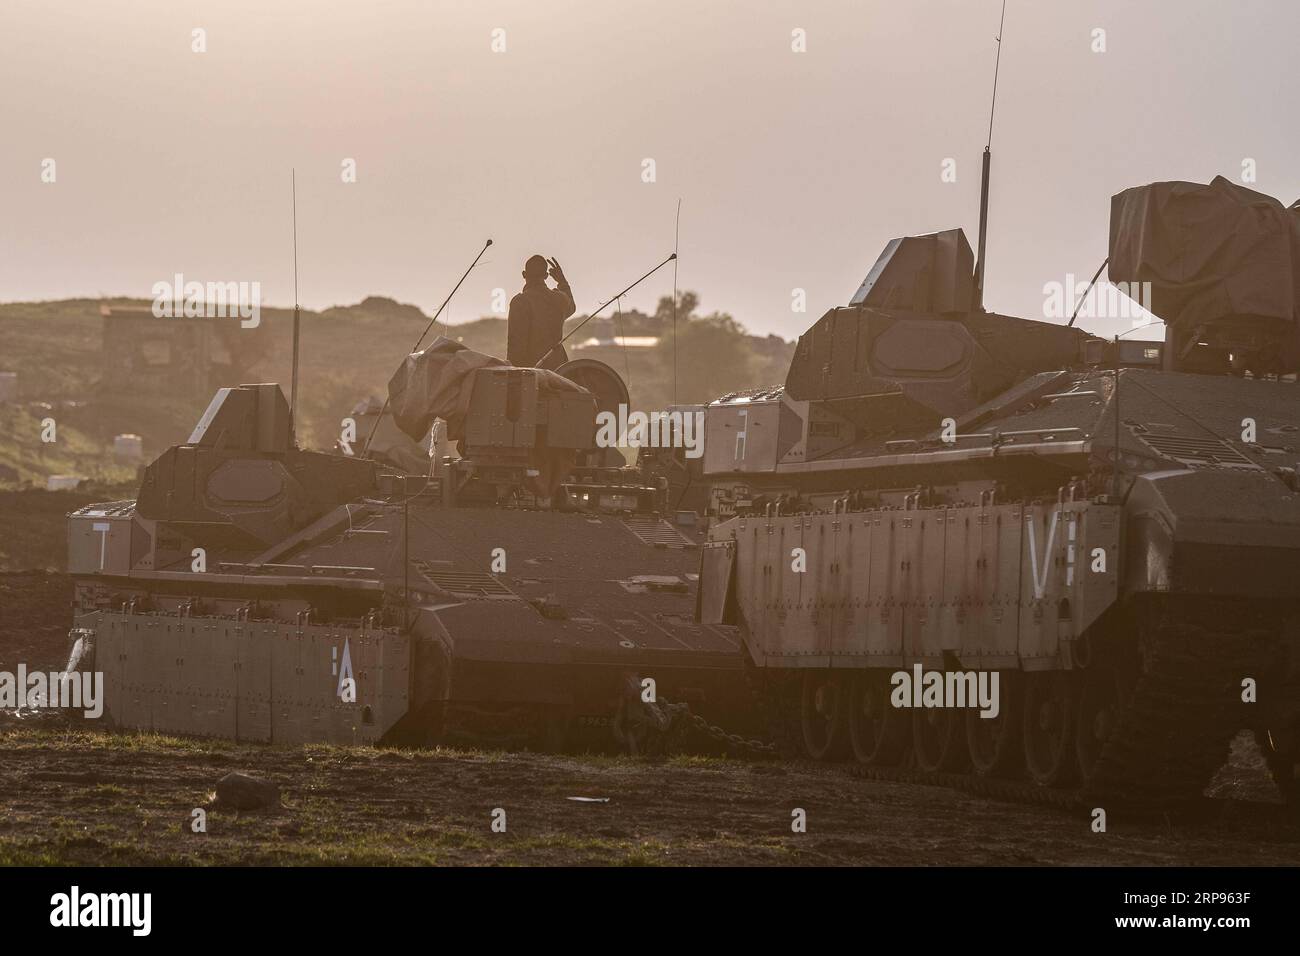 (190325) -- GOLAN HEIGHTS, March 25, 2019 -- Photo taken on March 25, 2019 shows Israeli armored personnel carriers in the Israeli-occupied Golan Heights. U.S. President Donald Trump on Monday signed a proclamation recognizing Israel s sovereignty over the disputed Golan Heights, marking a major shift in U.S. policy in the Middle East. ) MIDEAST-GOLAN HEIGHTS-ISRAEL-ARMY JINI/AyalxMargolin PUBLICATIONxNOTxINxCHN Stock Photo